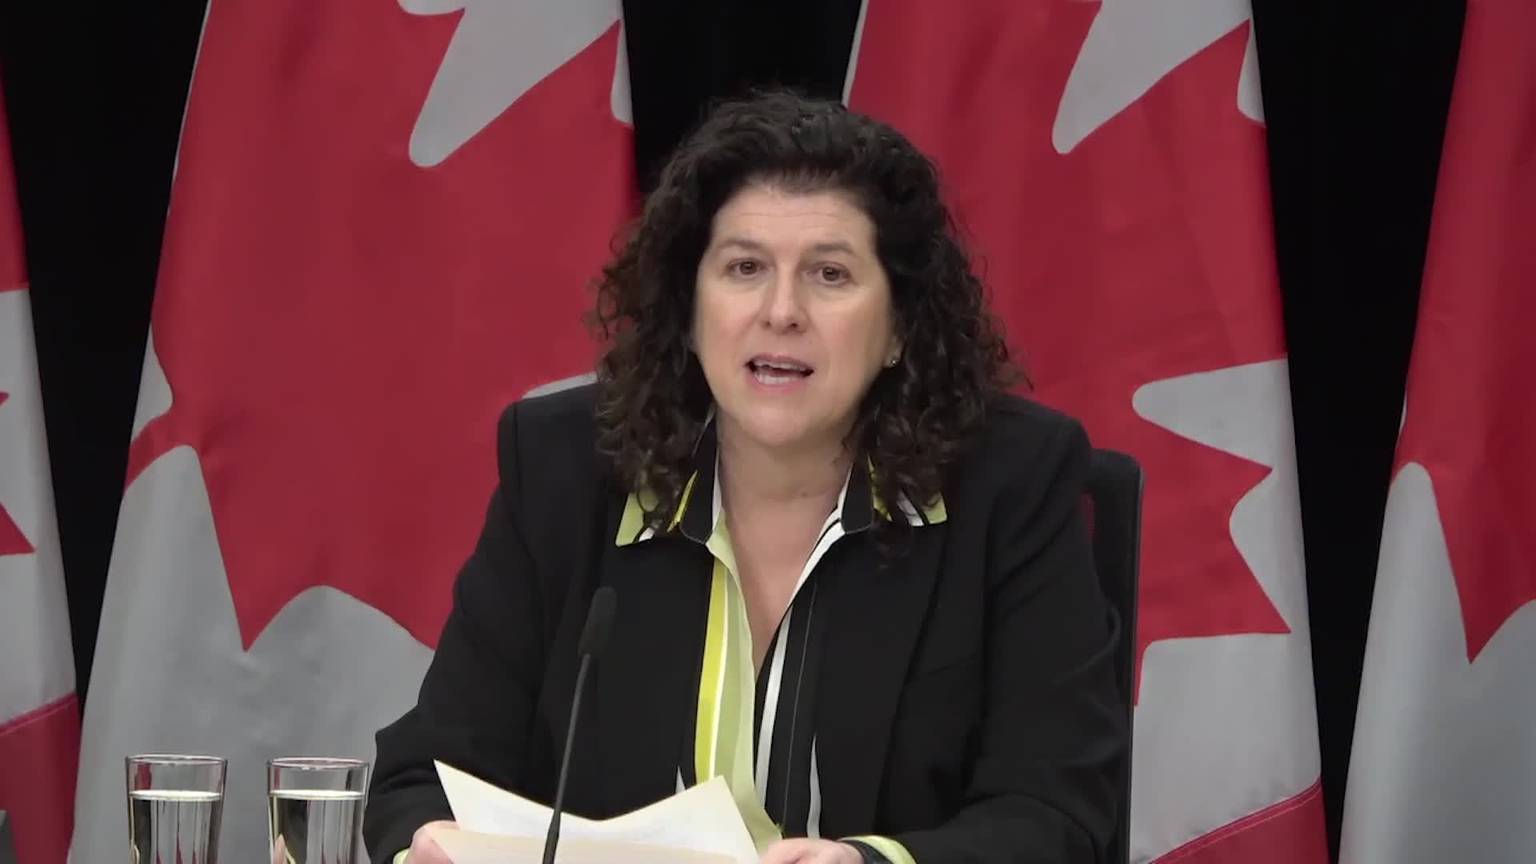 Video: Audit reveals distressing and persistent pattern of failure in First Nations federal programs [Video]